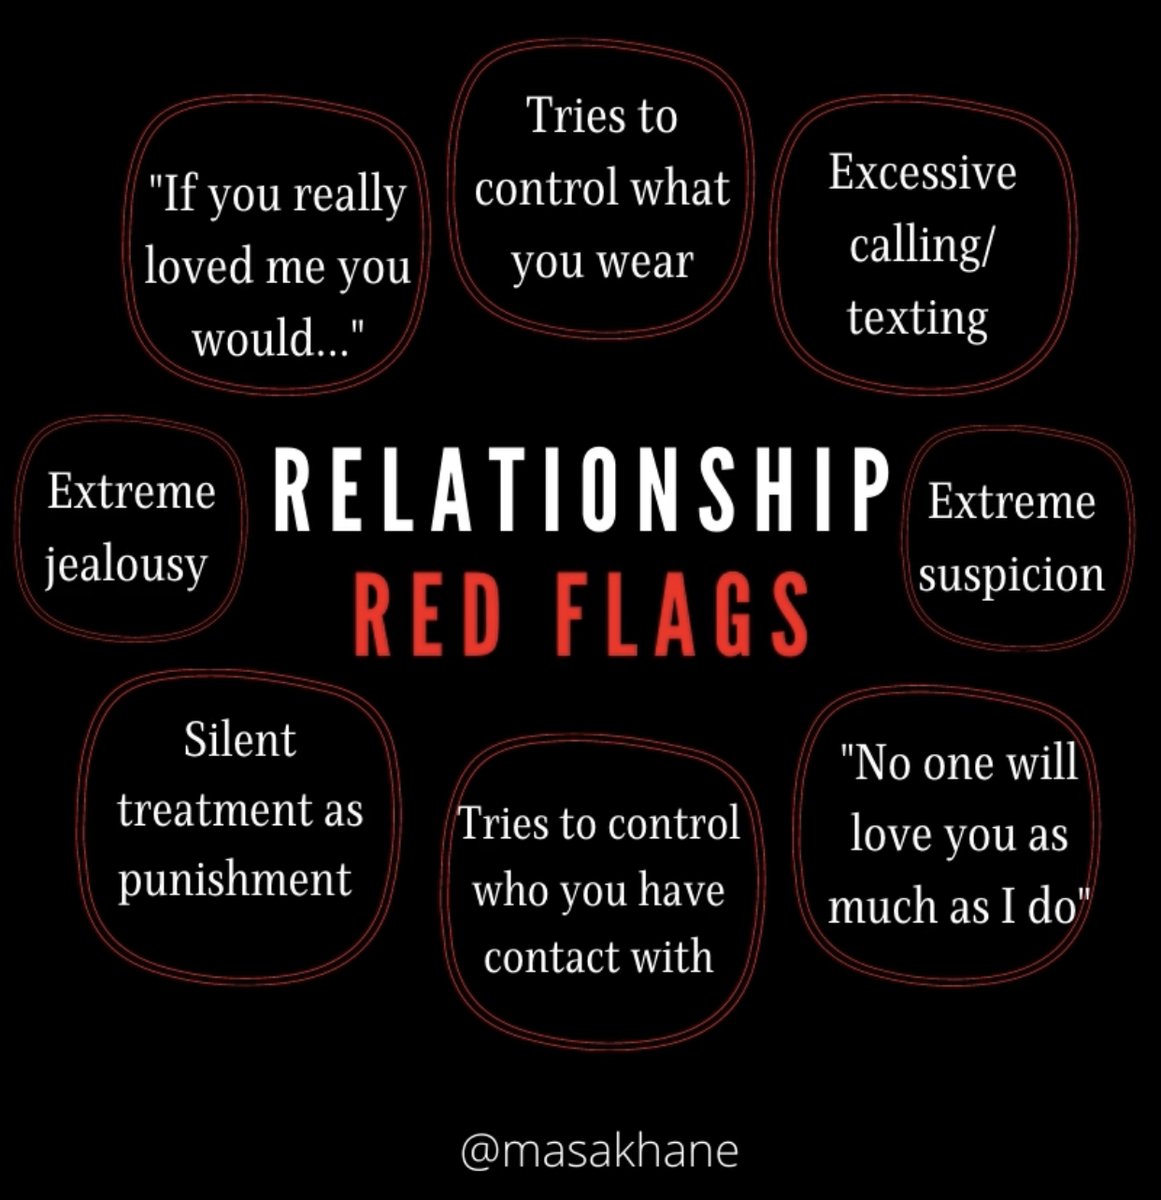 Masakhane Center on Twitter: "Red flags are a variety indicators that serve as warning signs for relationships that may cause trouble in one's future. Red flags can in romantic, platonic,